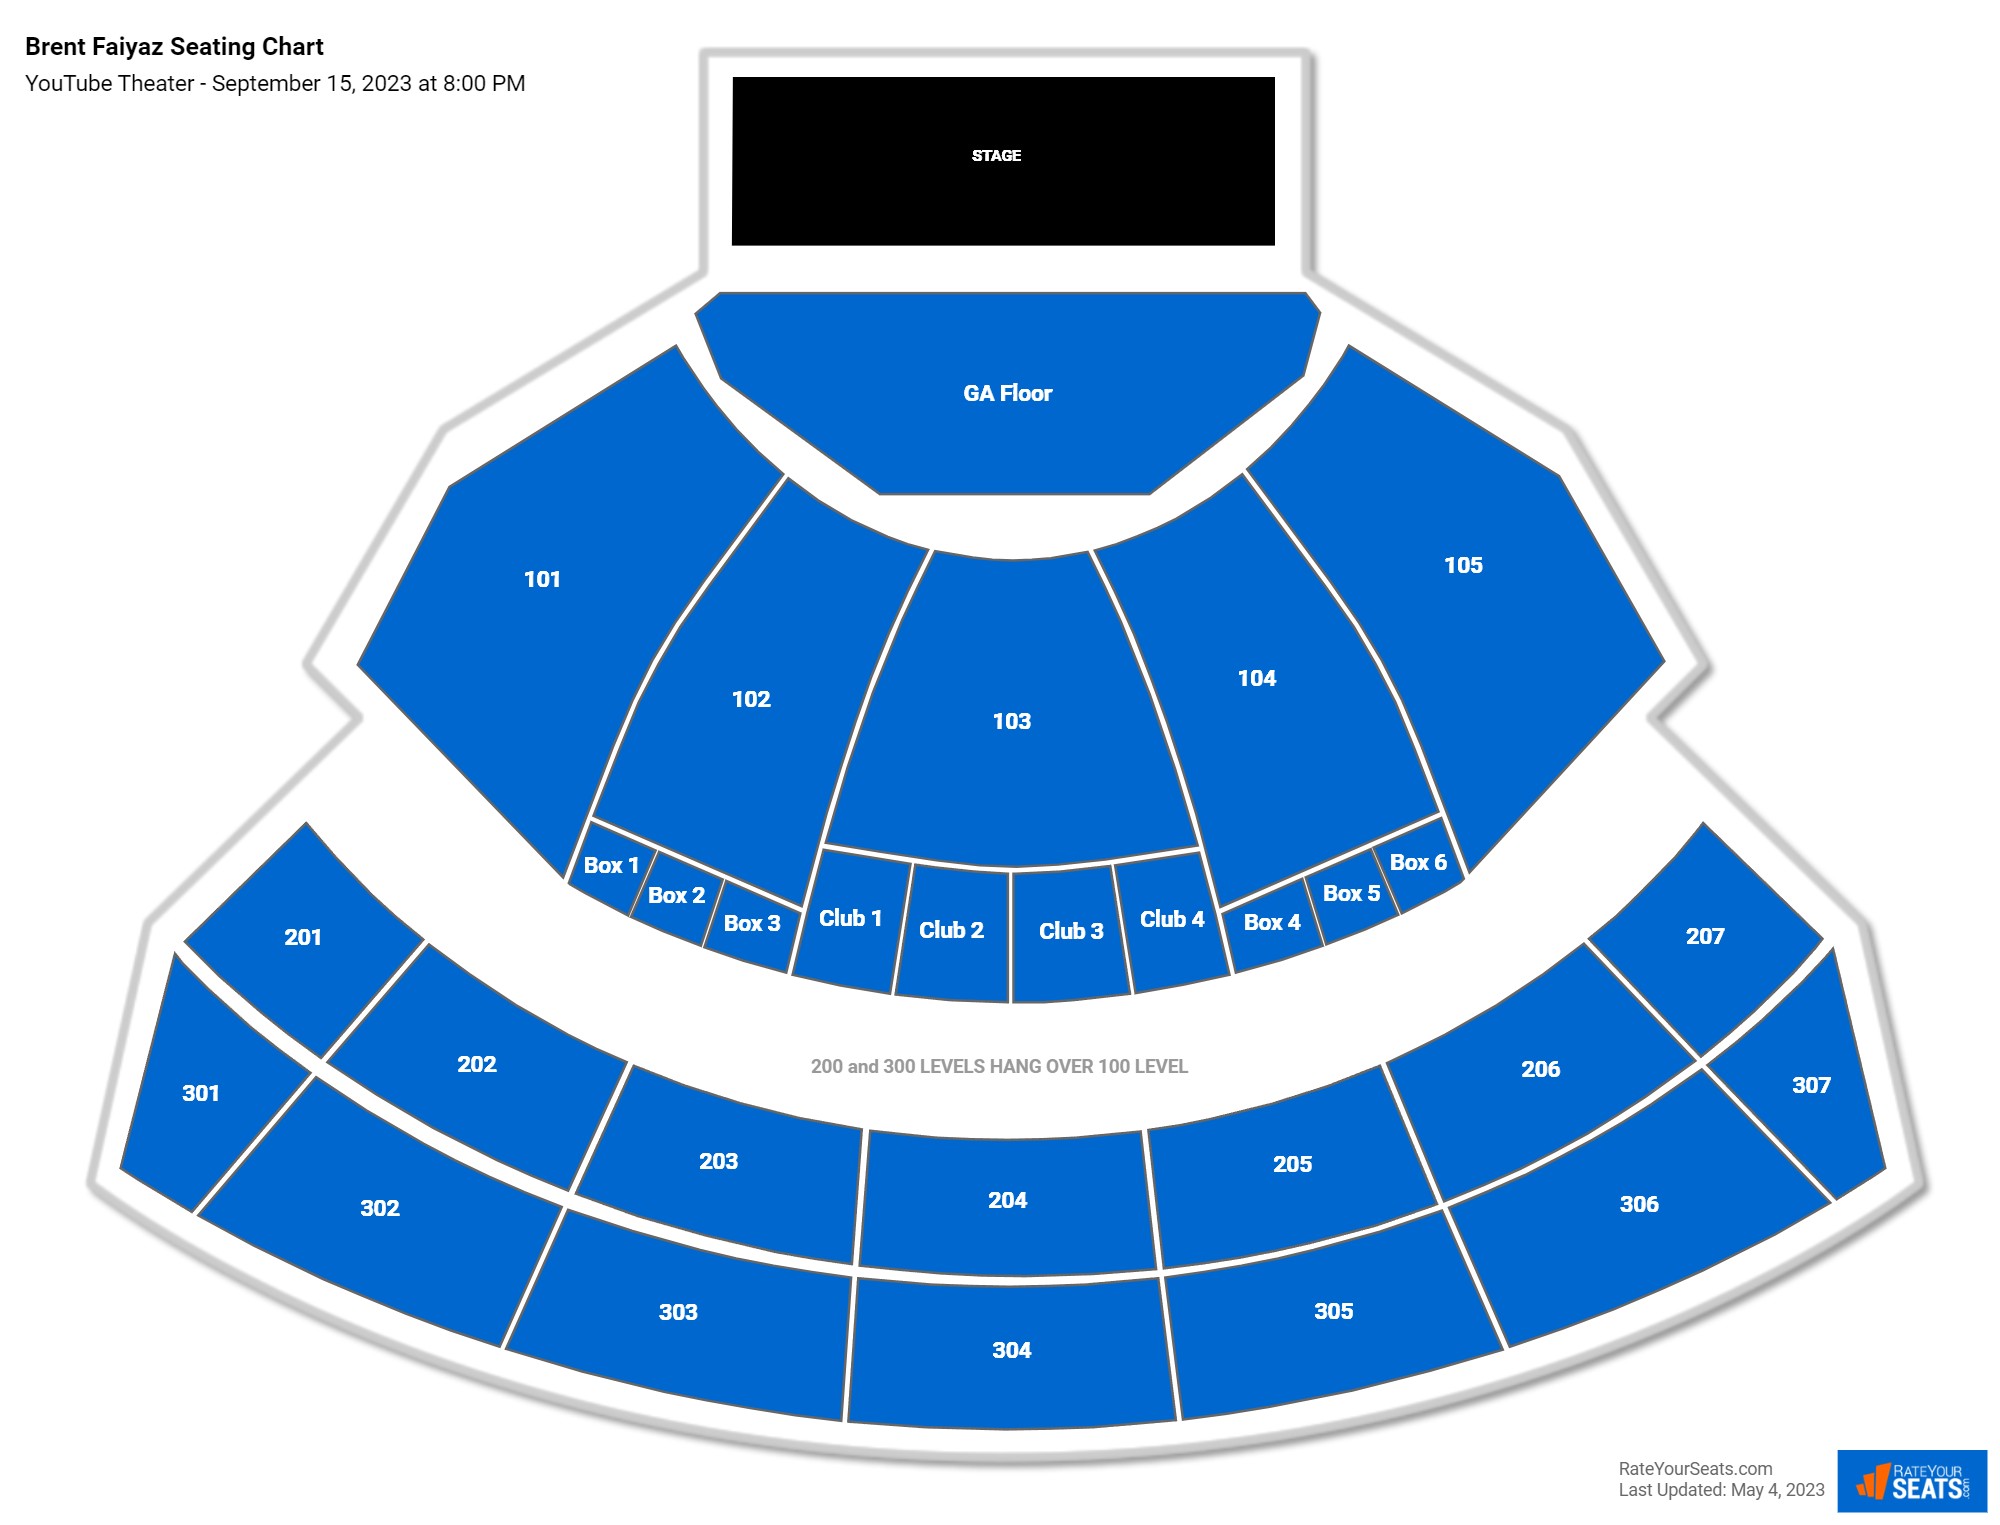 YouTube Theater Seating Chart - RateYourSeats.com